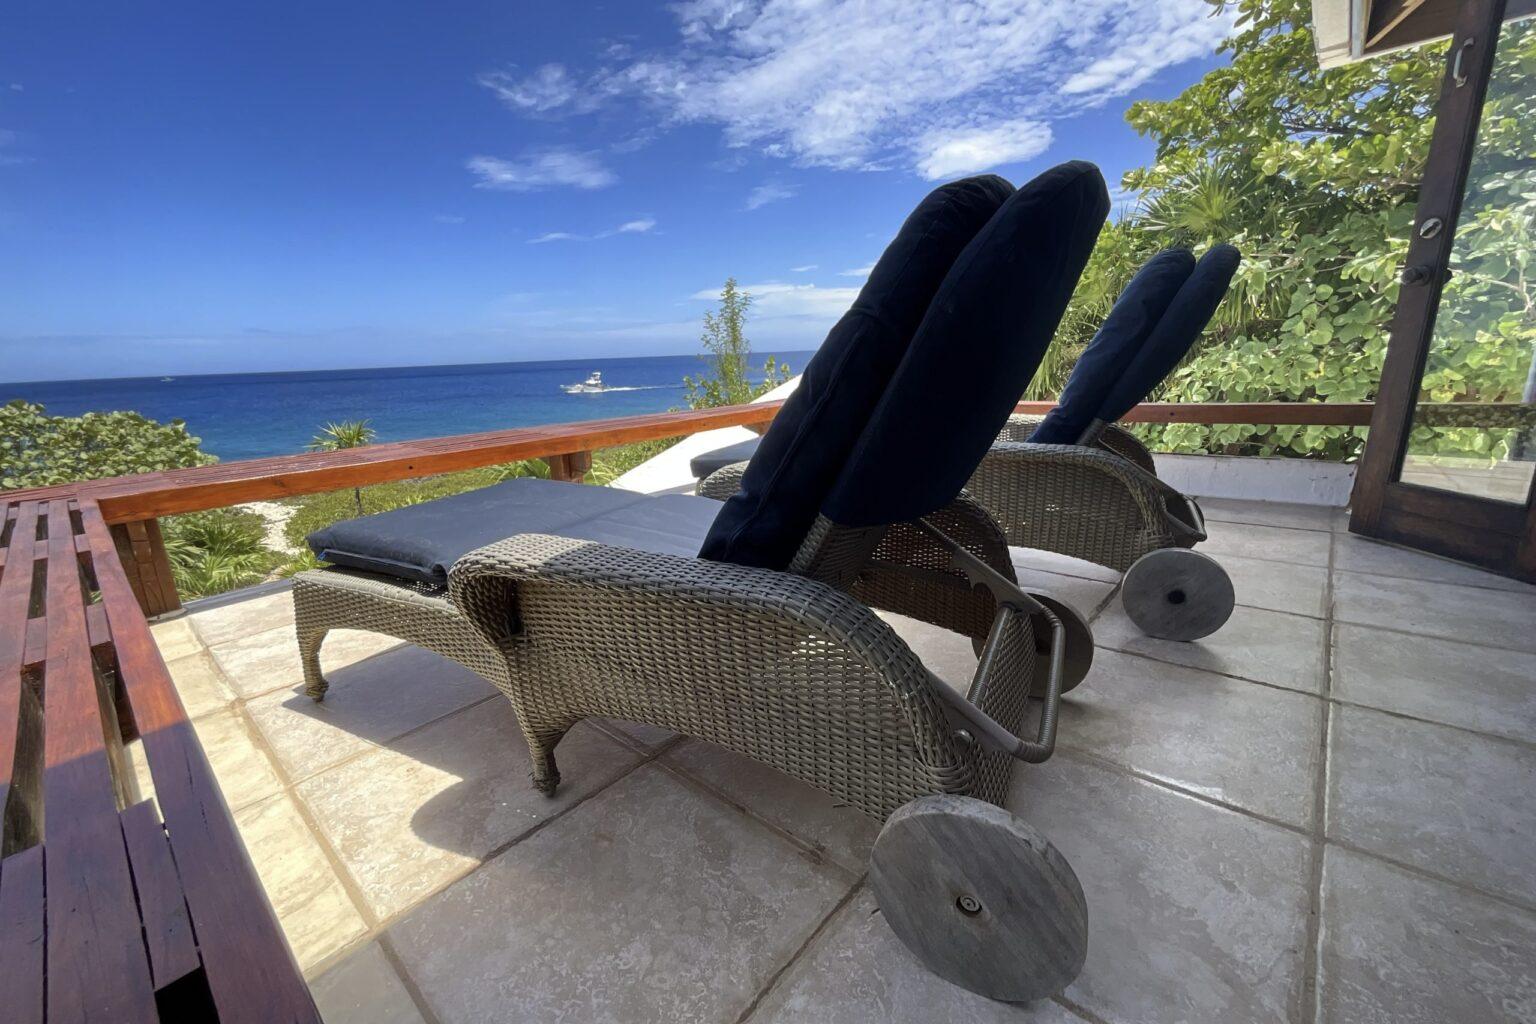 Featured Roatan Real Estate Listings, Roatan Homes for Sale, West End Oceanfront Home and Lot, Roatan Luxury Properties